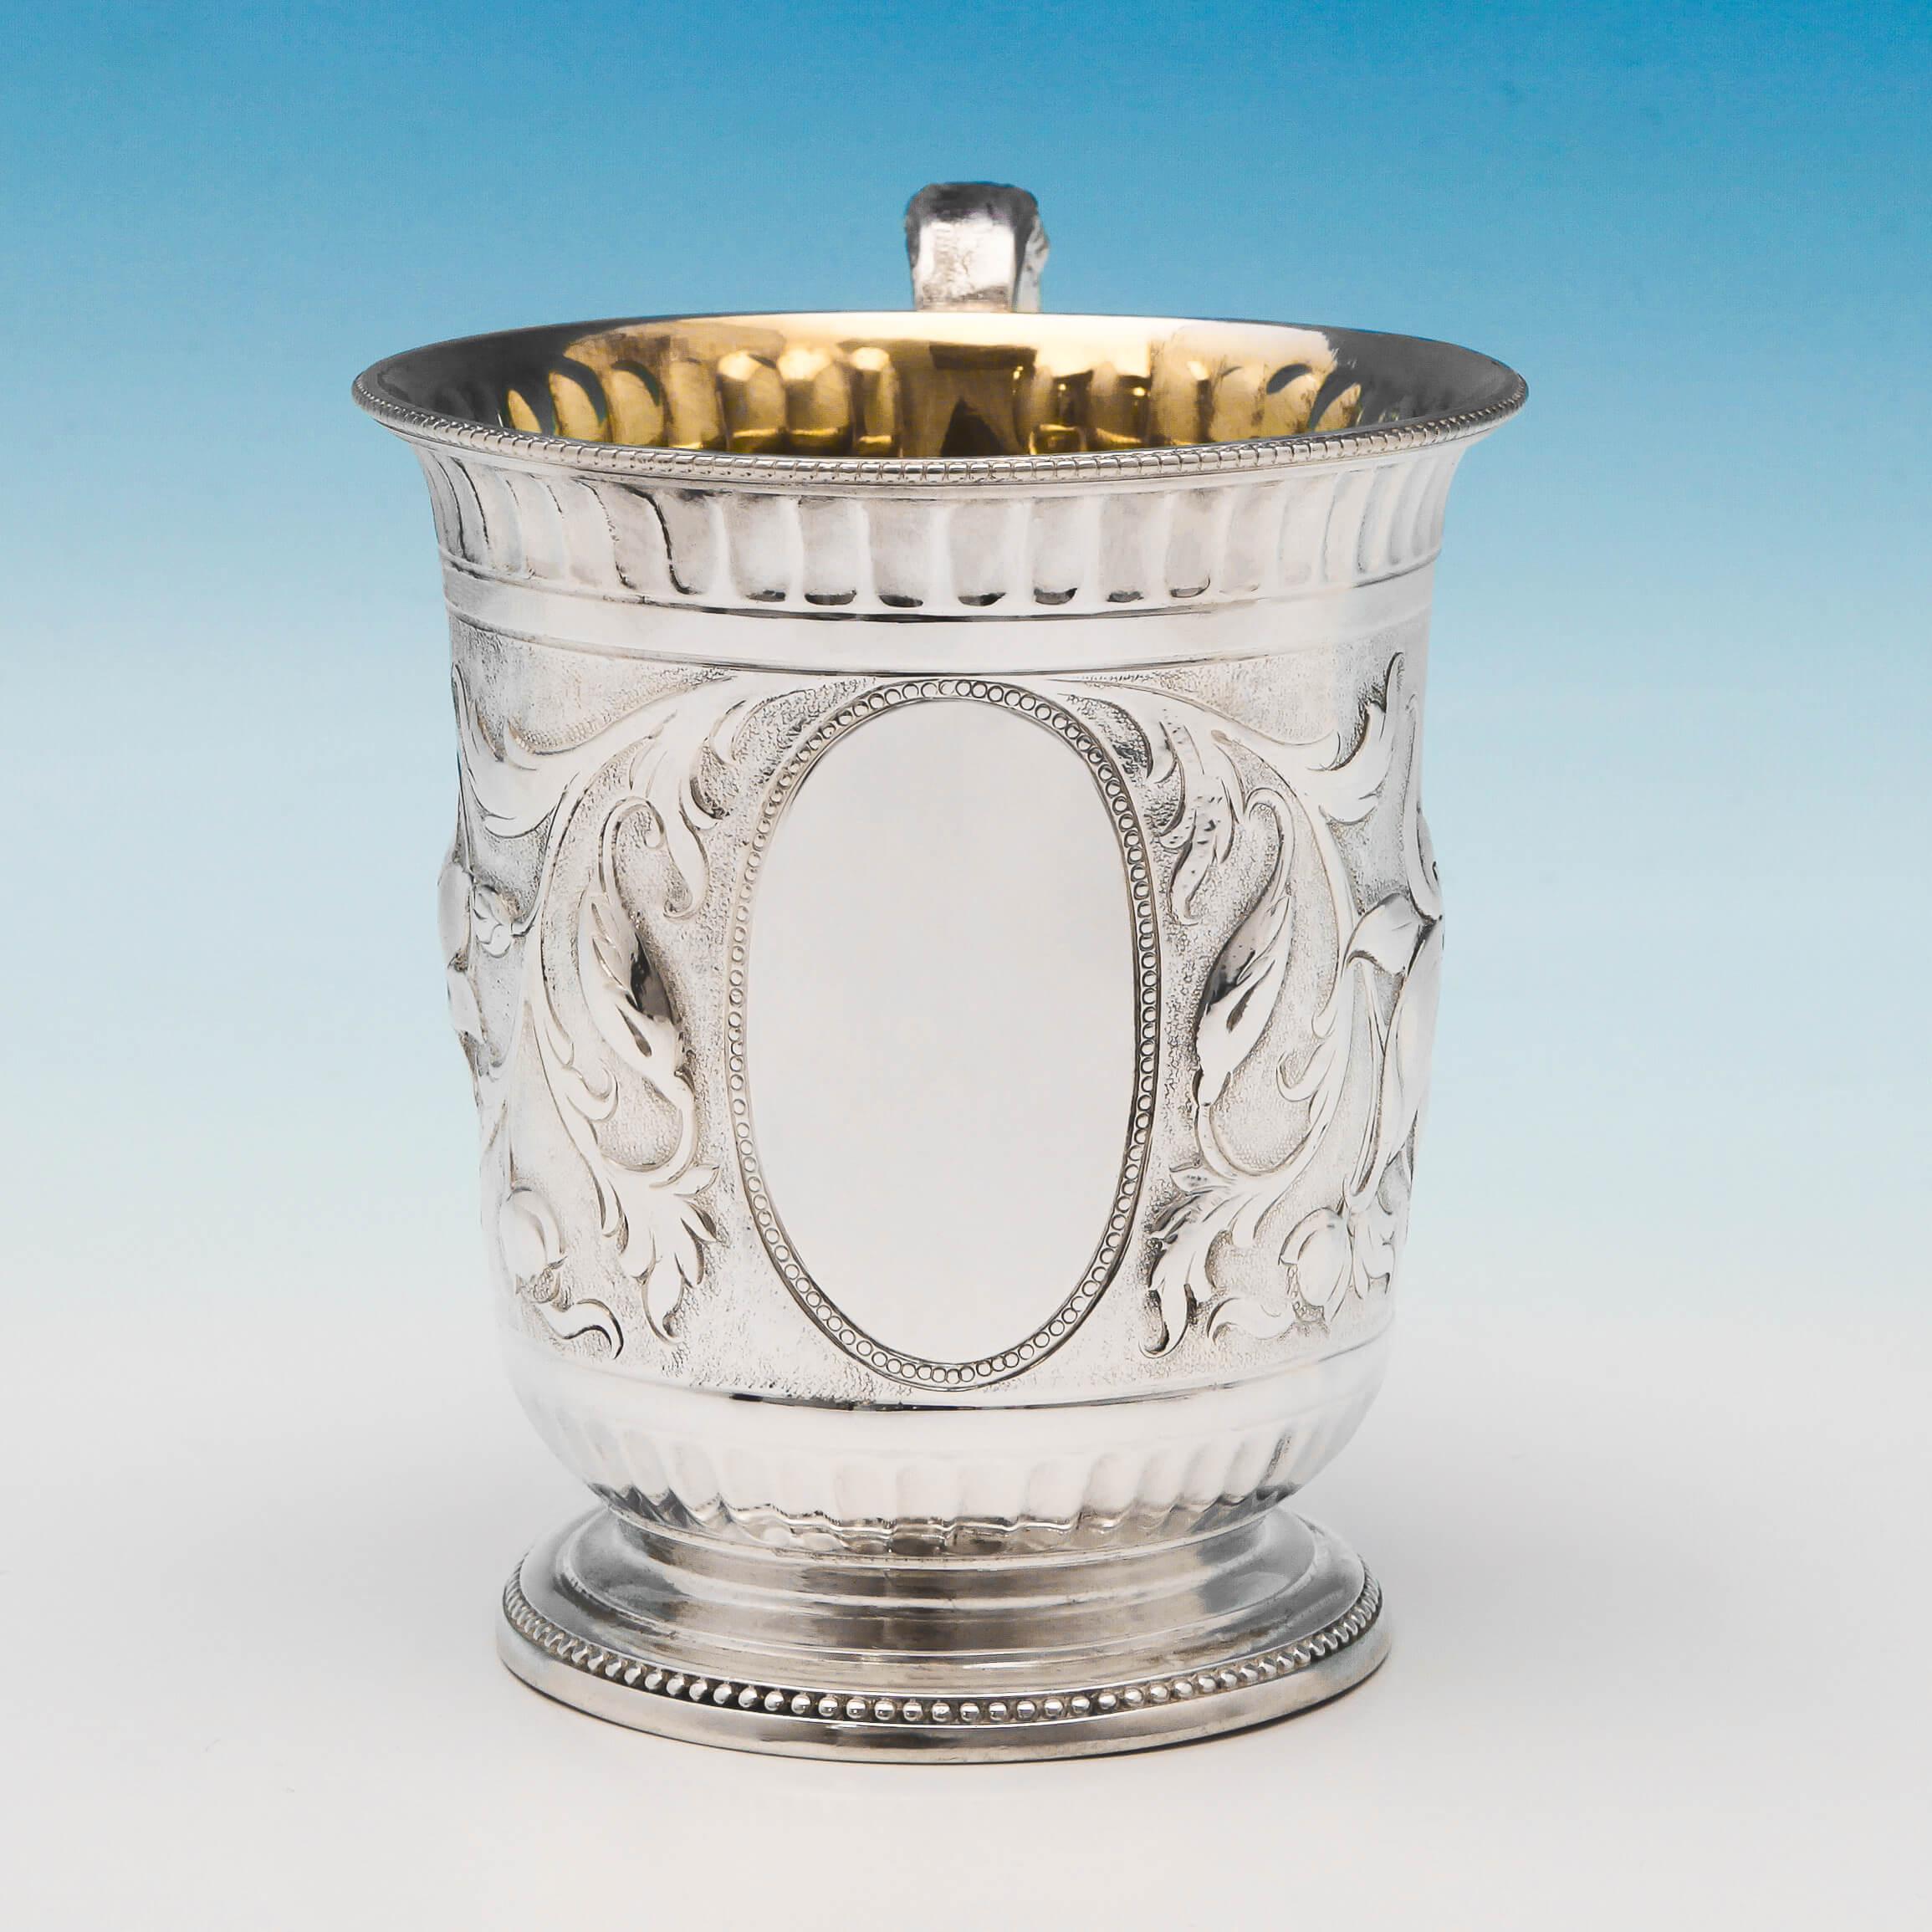 Hallmarked in London in 1867 by Samuel Smily, this striking, Victorian, antique, sterling silver Christening mug, features chased naturalistic decoration, an acanthus detailed scroll handle, and a gilt interior. The christening mug measures: 3.75